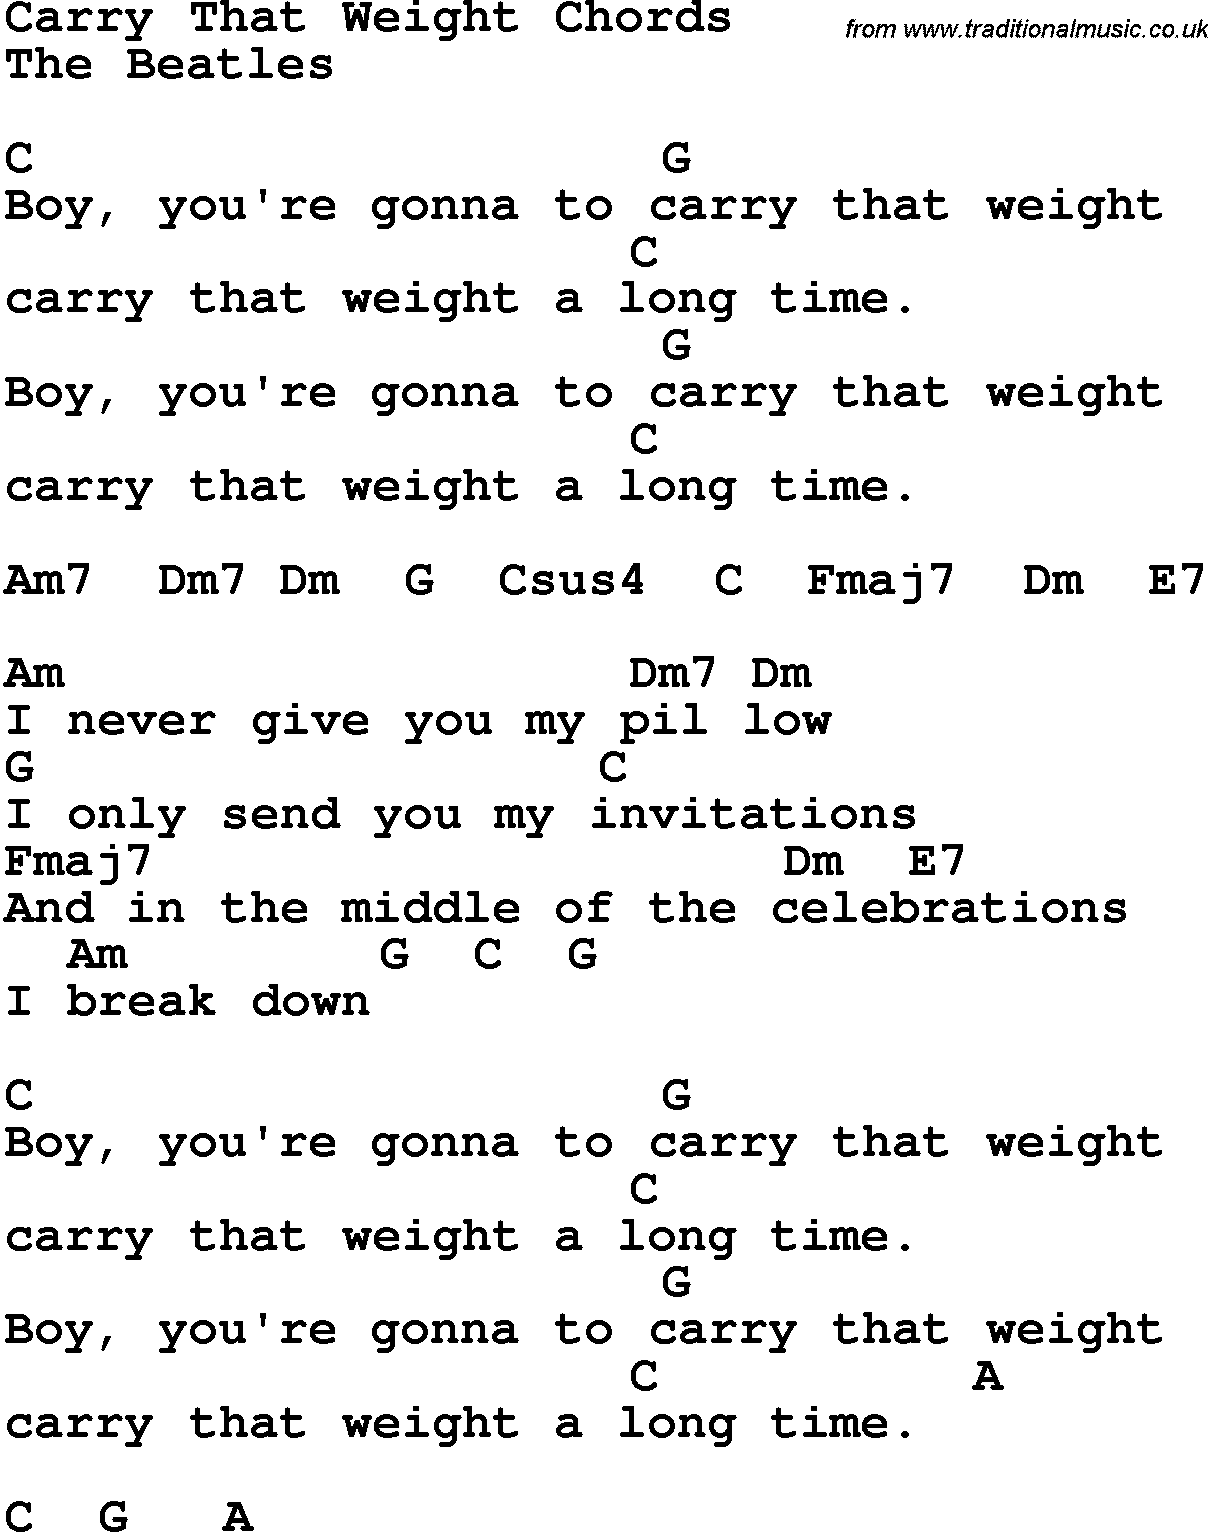 Song Lyrics with guitar chords for Carry That Weight - The Beatles